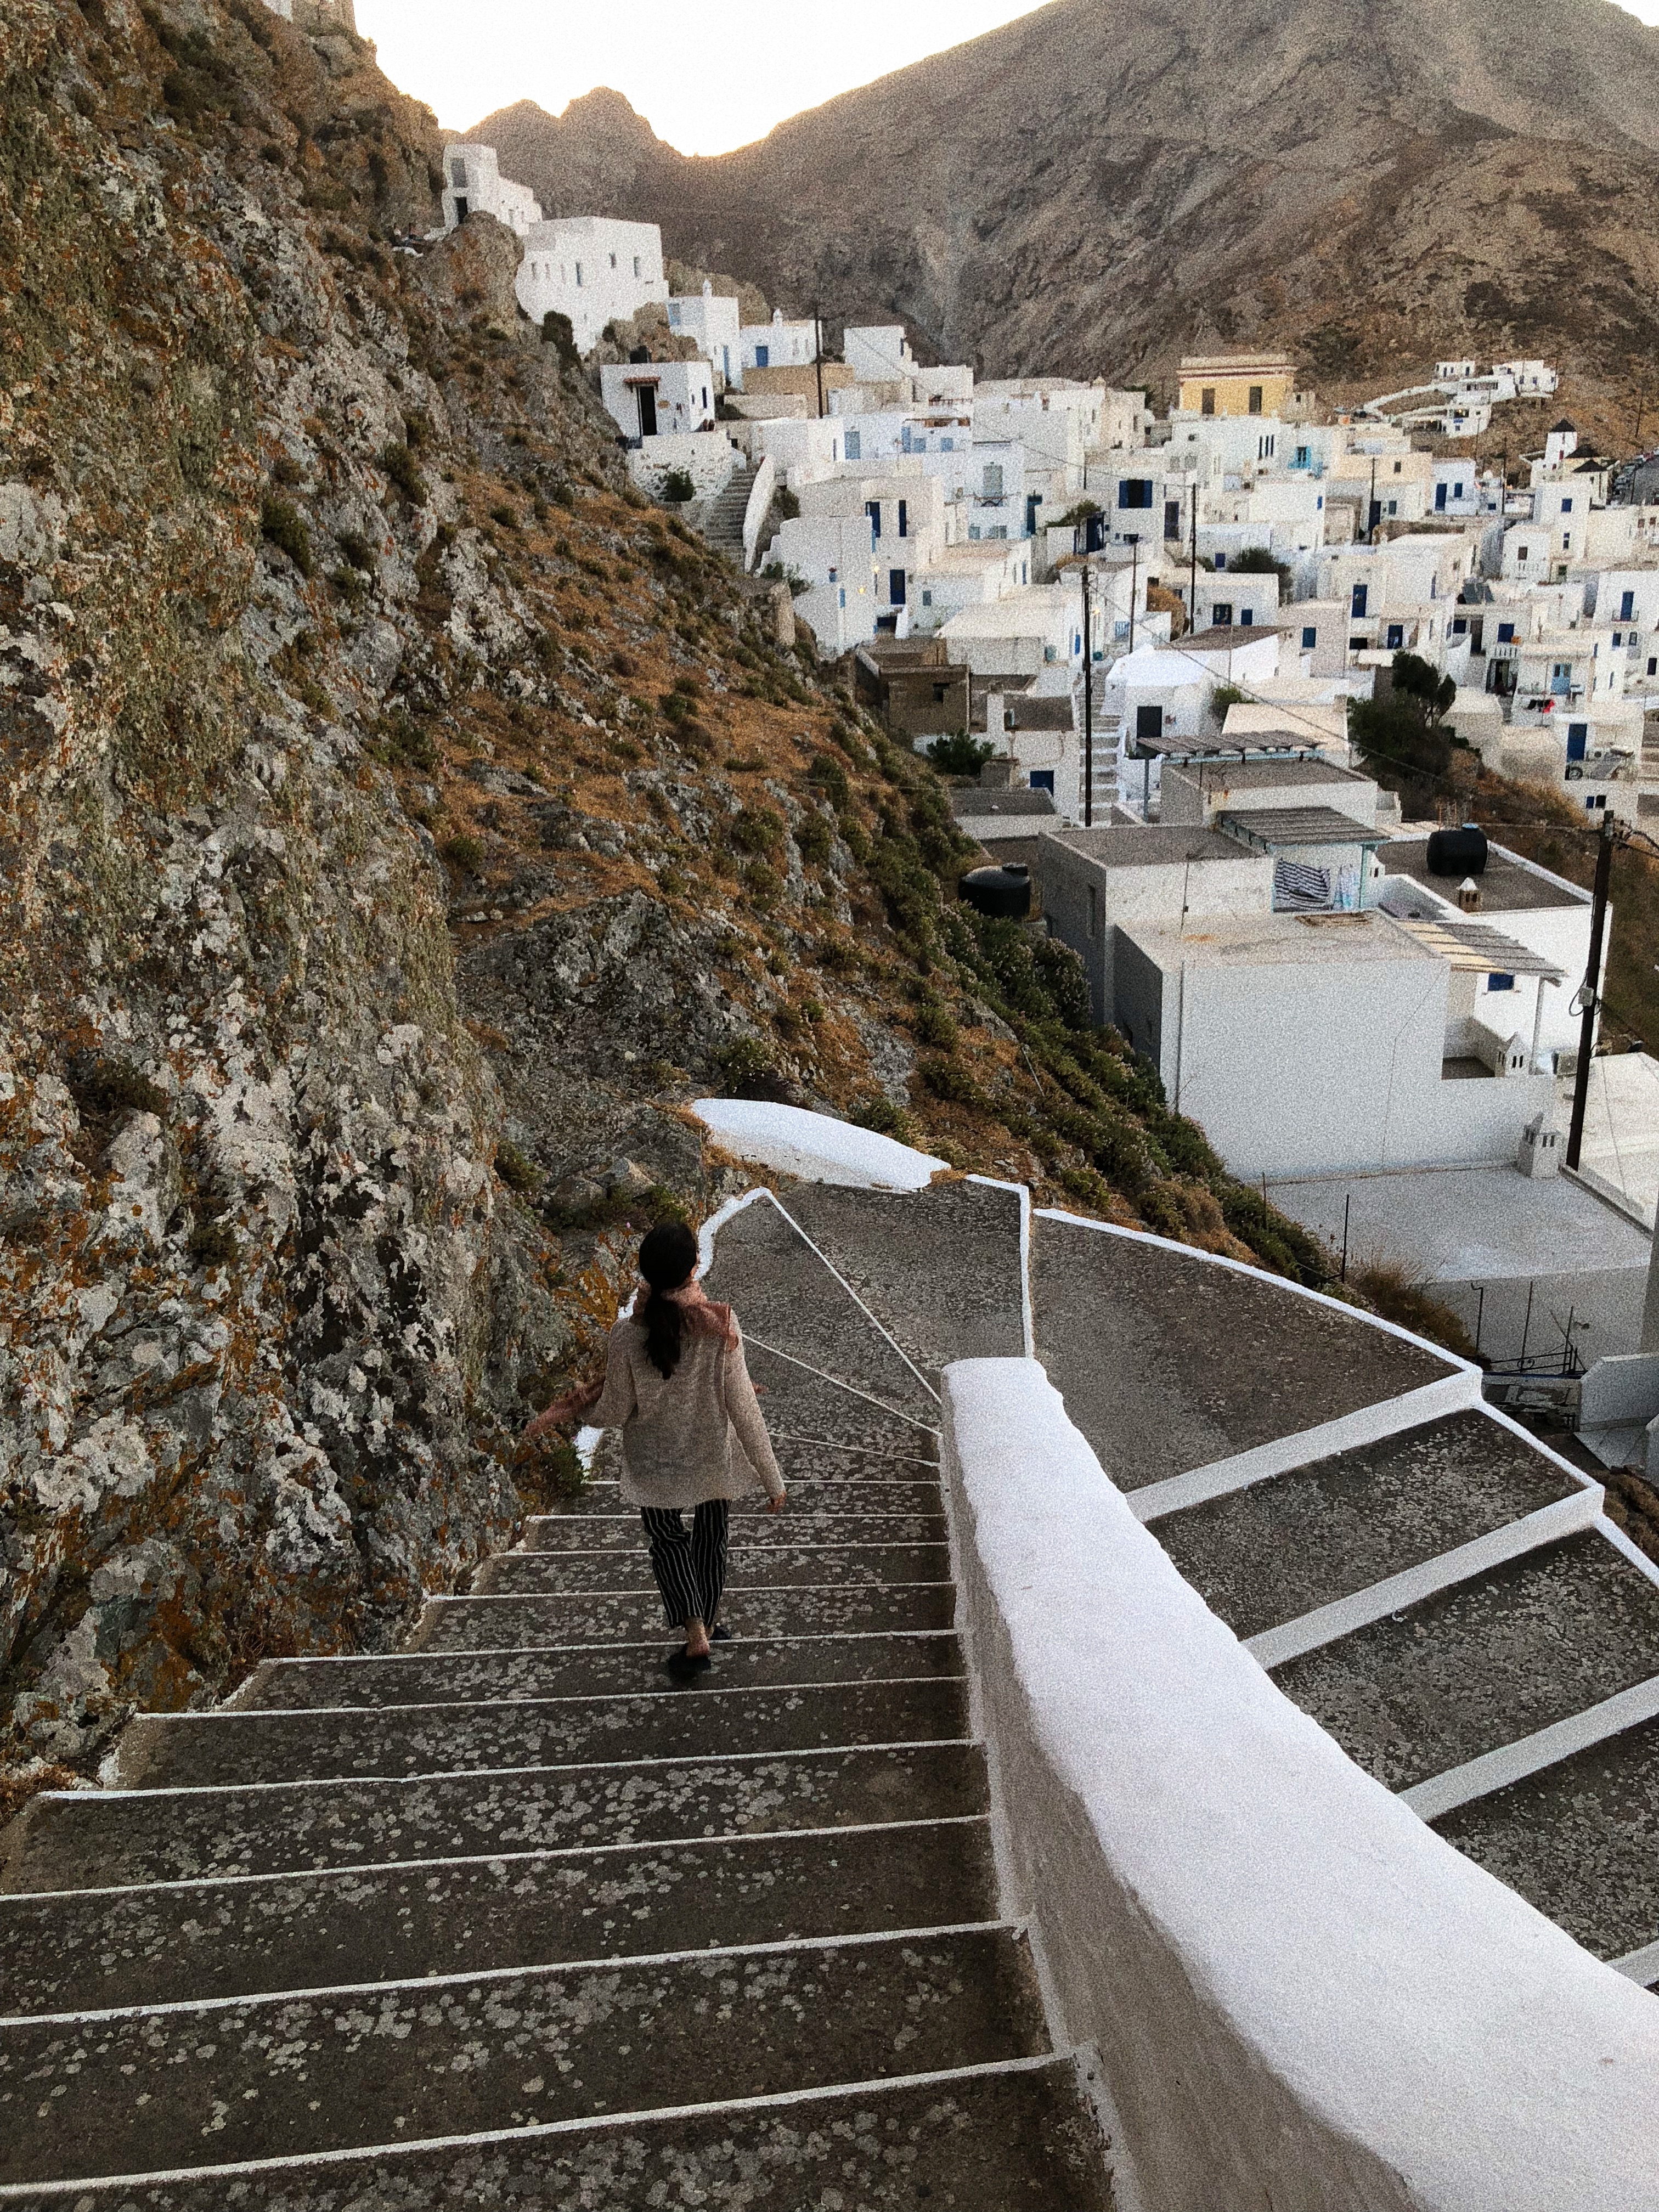 TRAVEL GUIDE TO SERIFOS, GREECE | ISLAND OF THE CYCLOPS